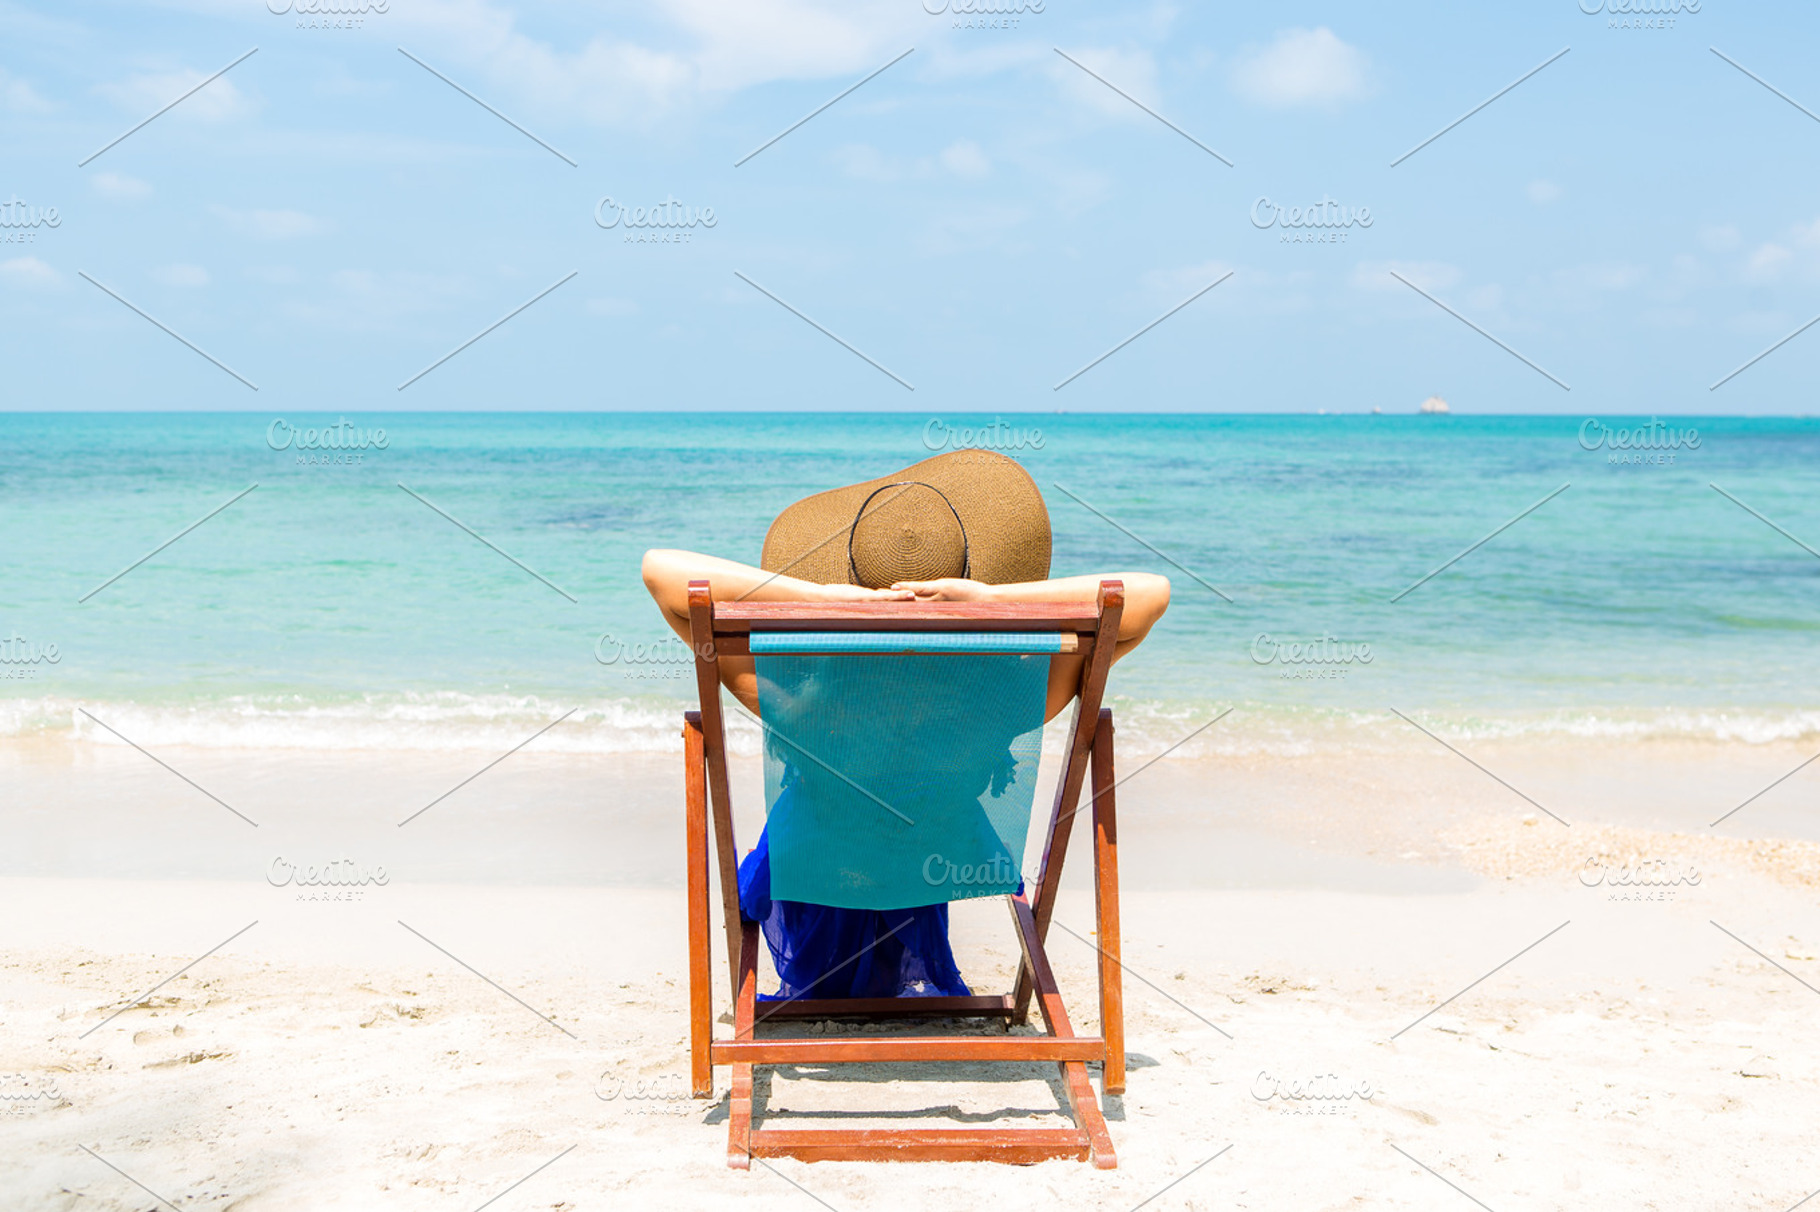 Cute Lady In Beach Chair High Quality People Images Creative